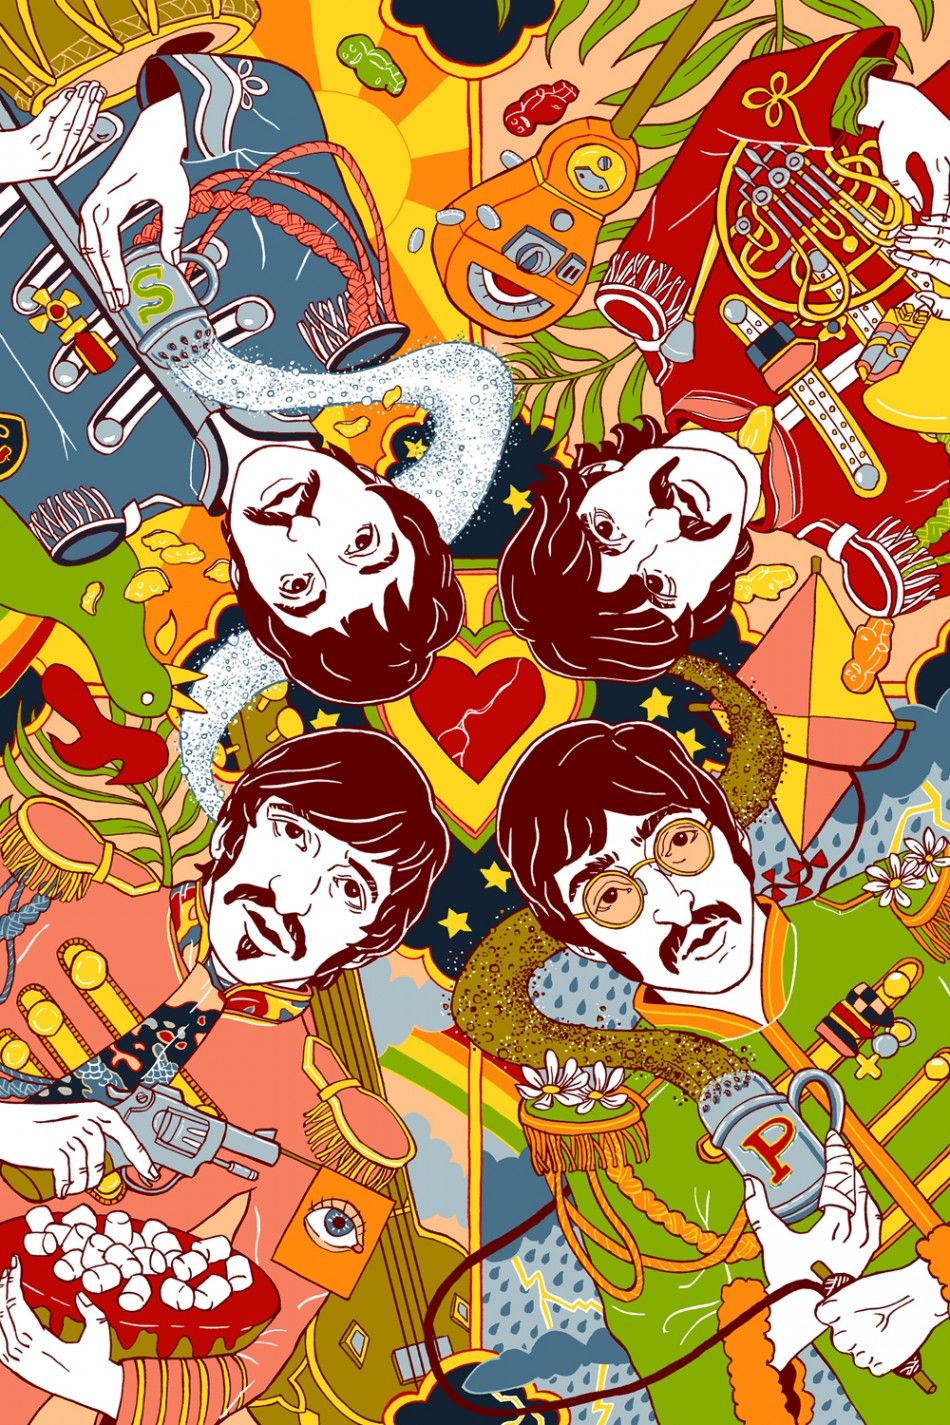 Sgt. Pepper's Lonely Hearts Club Band'